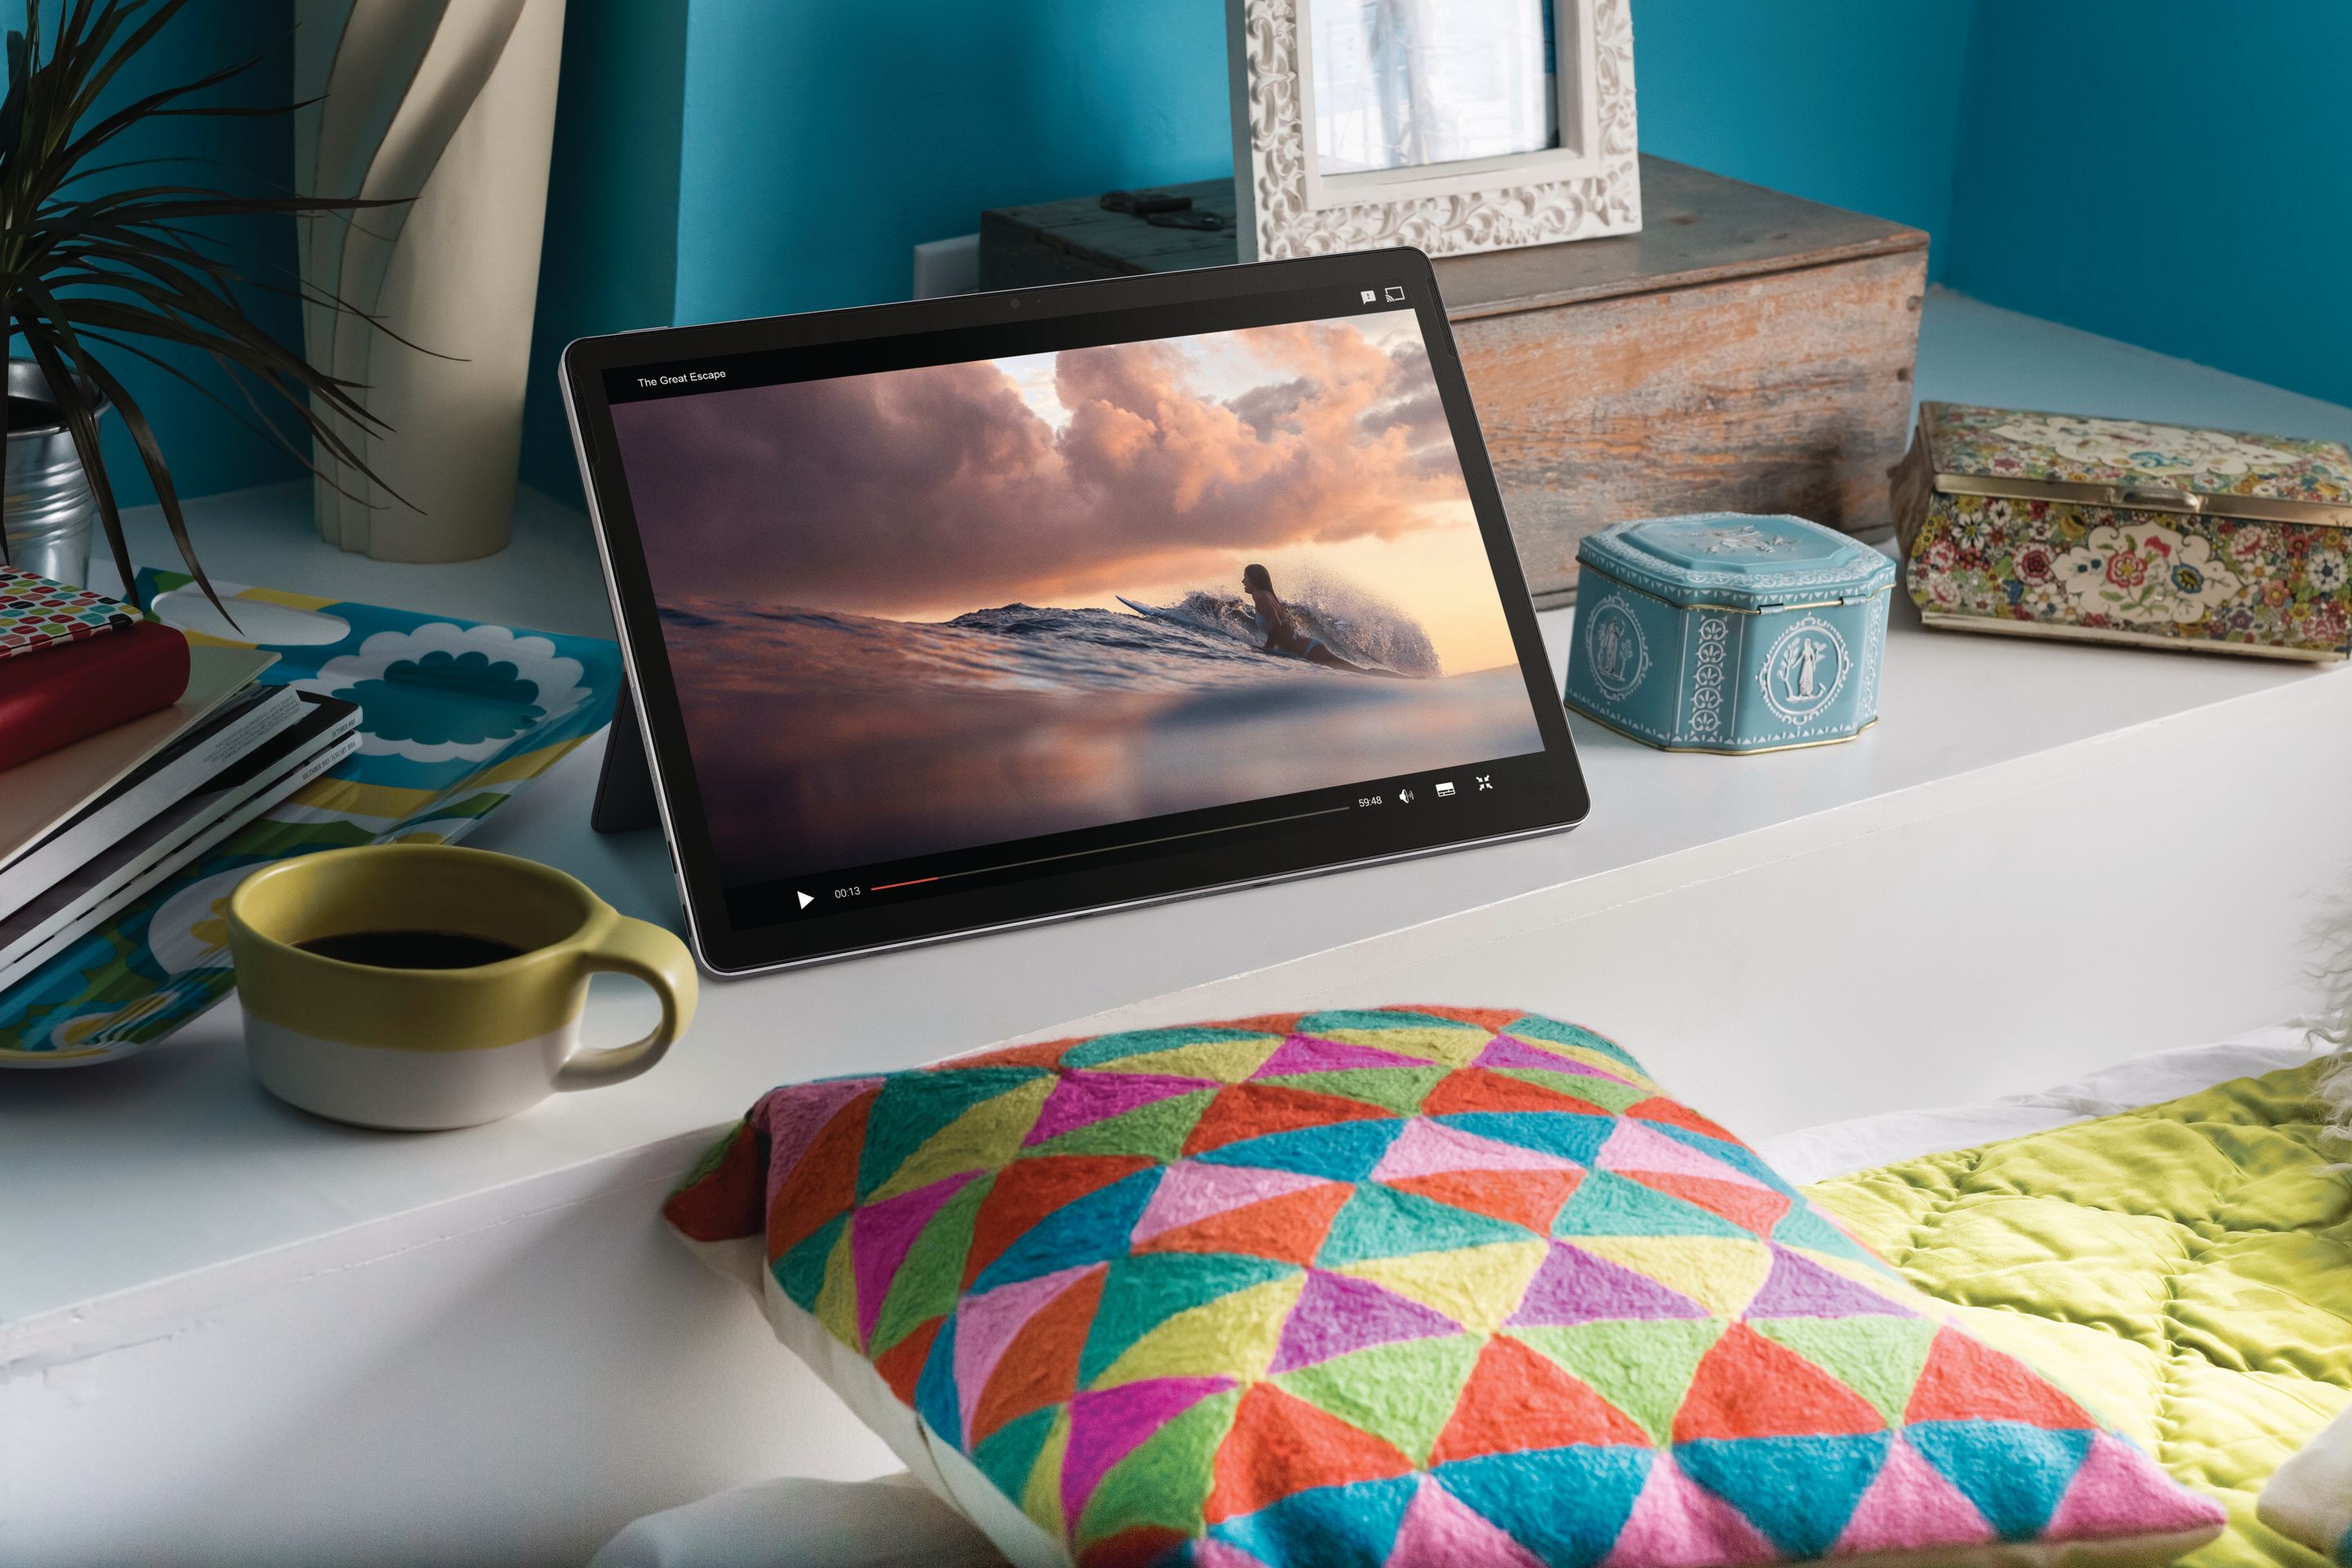 HP Chromebook X2 11 and HP Chromebase AIO Product Shots in a Lifestyle Setting